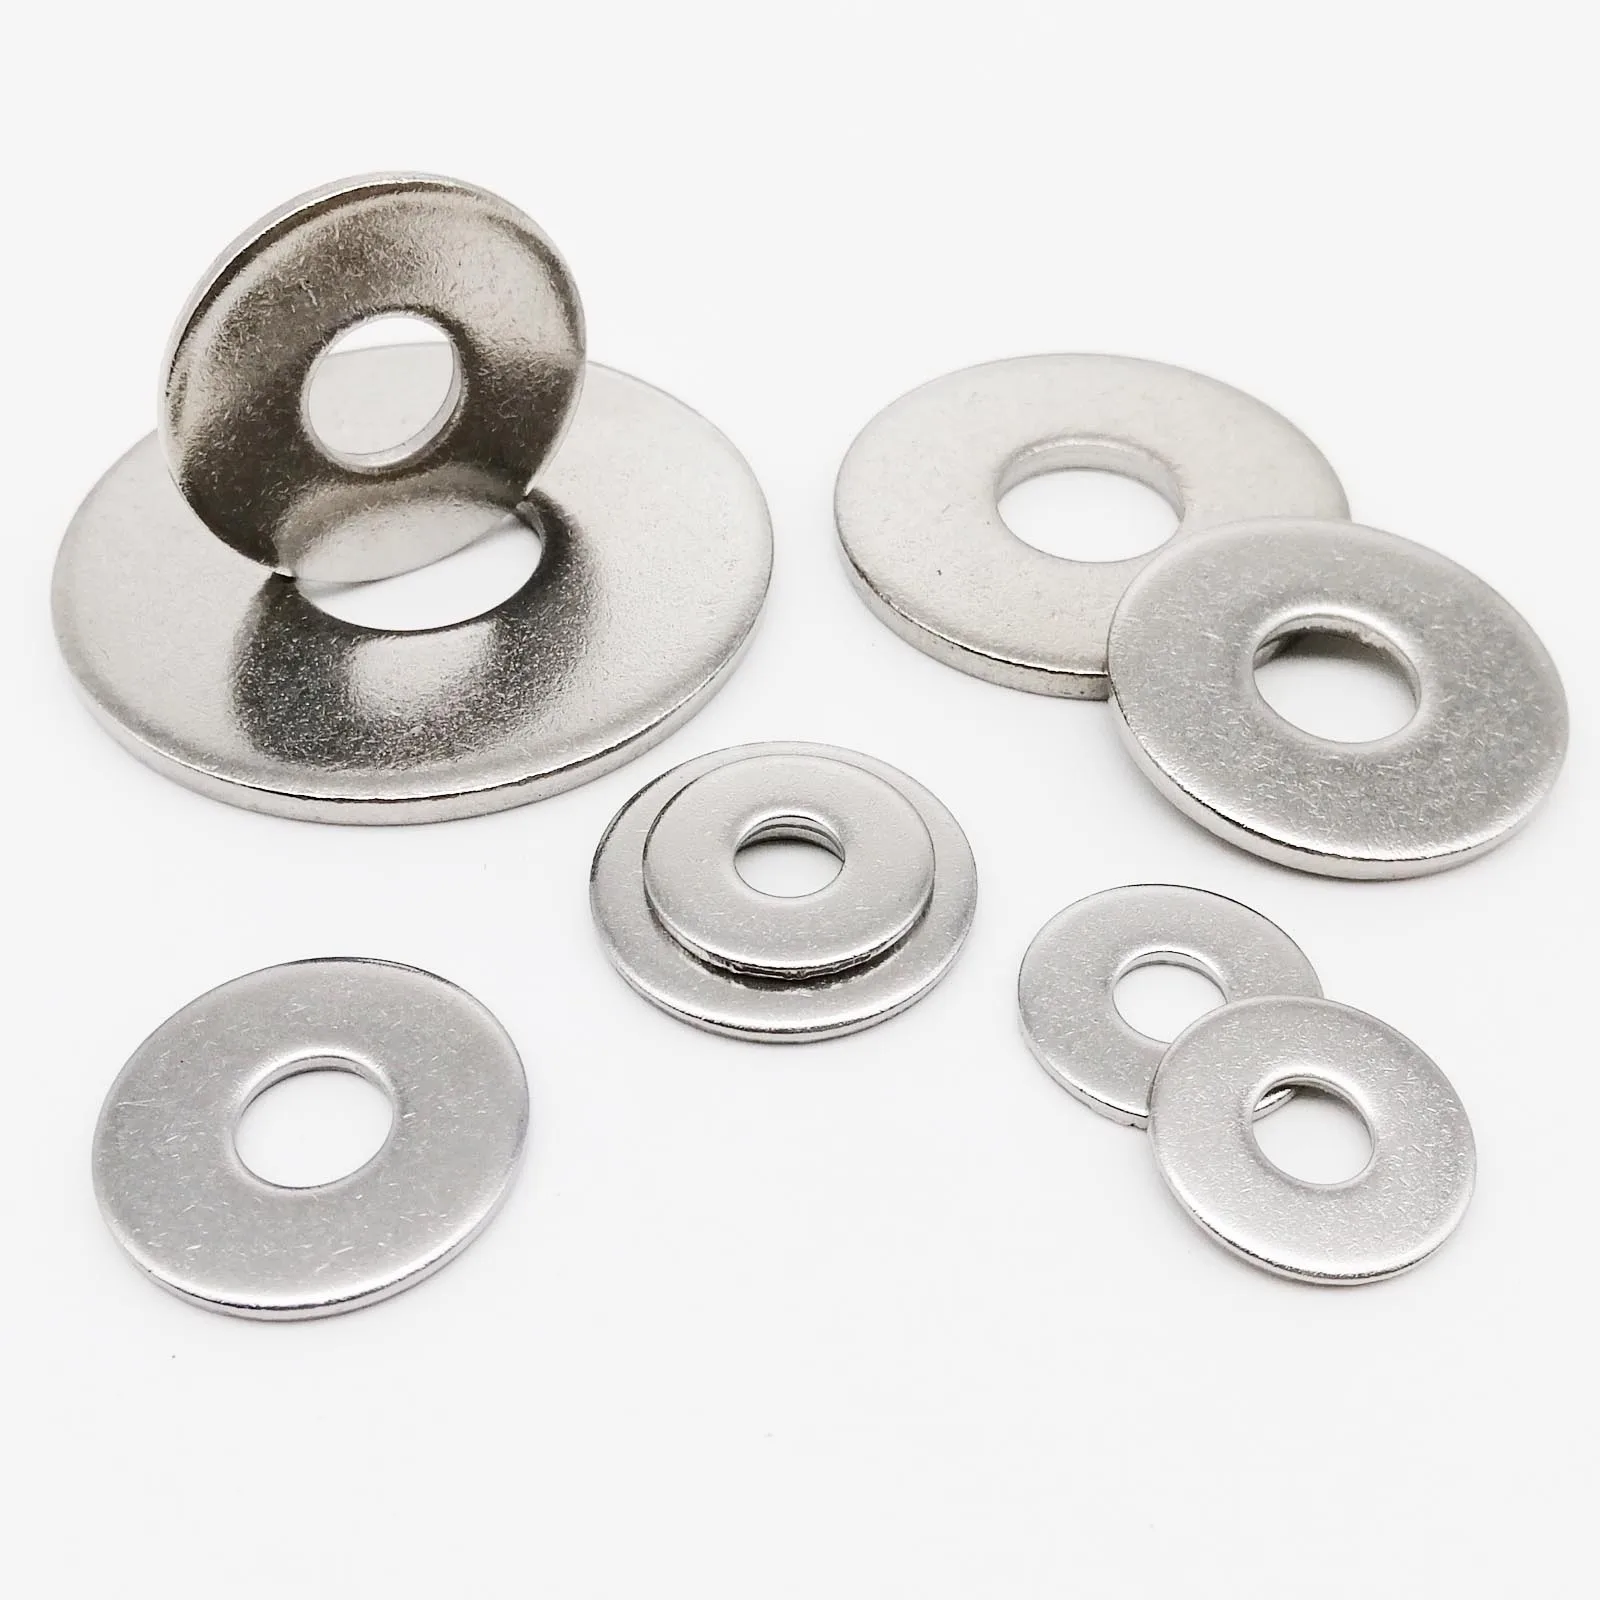 SPRING WASHERS Stainless Steel M2 M2.5 M3 M3.5 M4 M5 M6 M8 M10 M12 Quality Items 